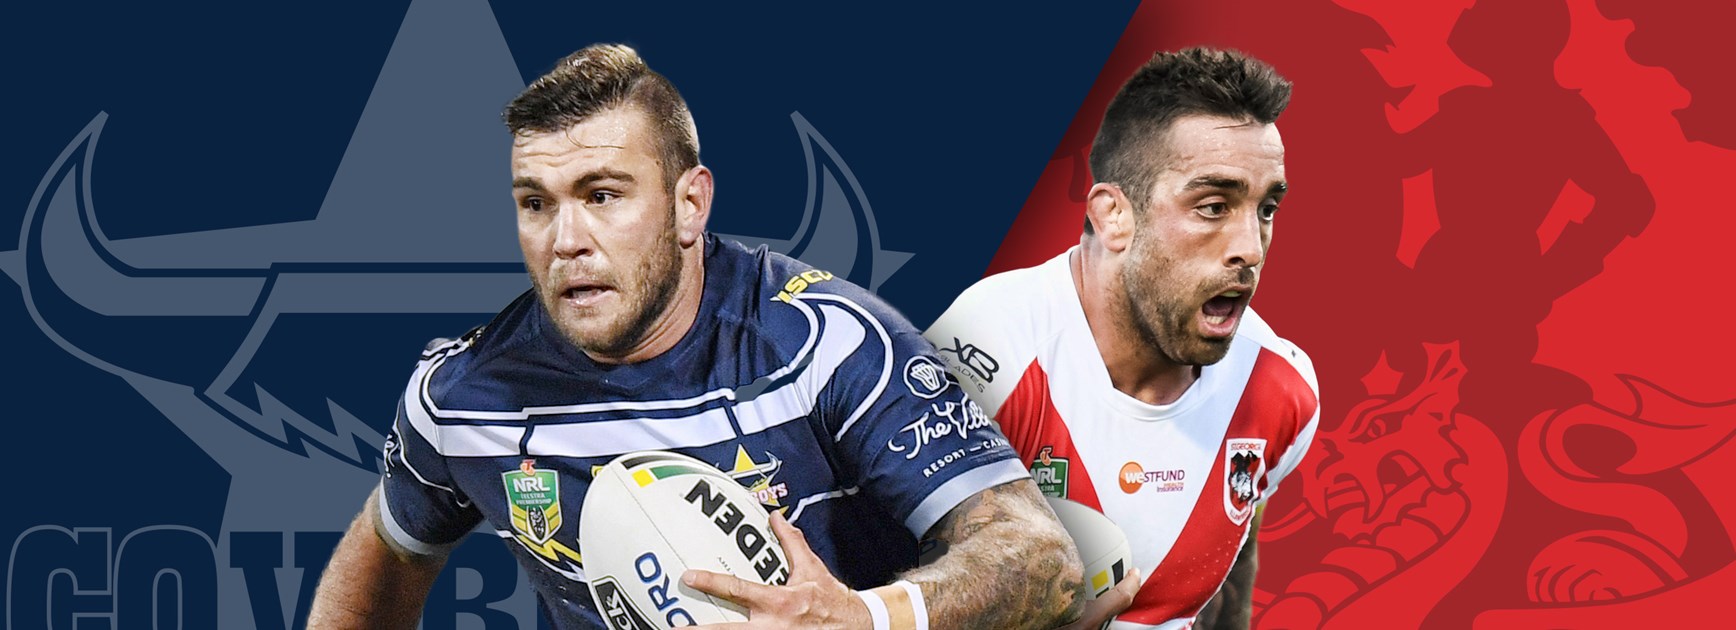 Cowboys v Dragons: Jake Clifford to debut; Frizell, Nene out